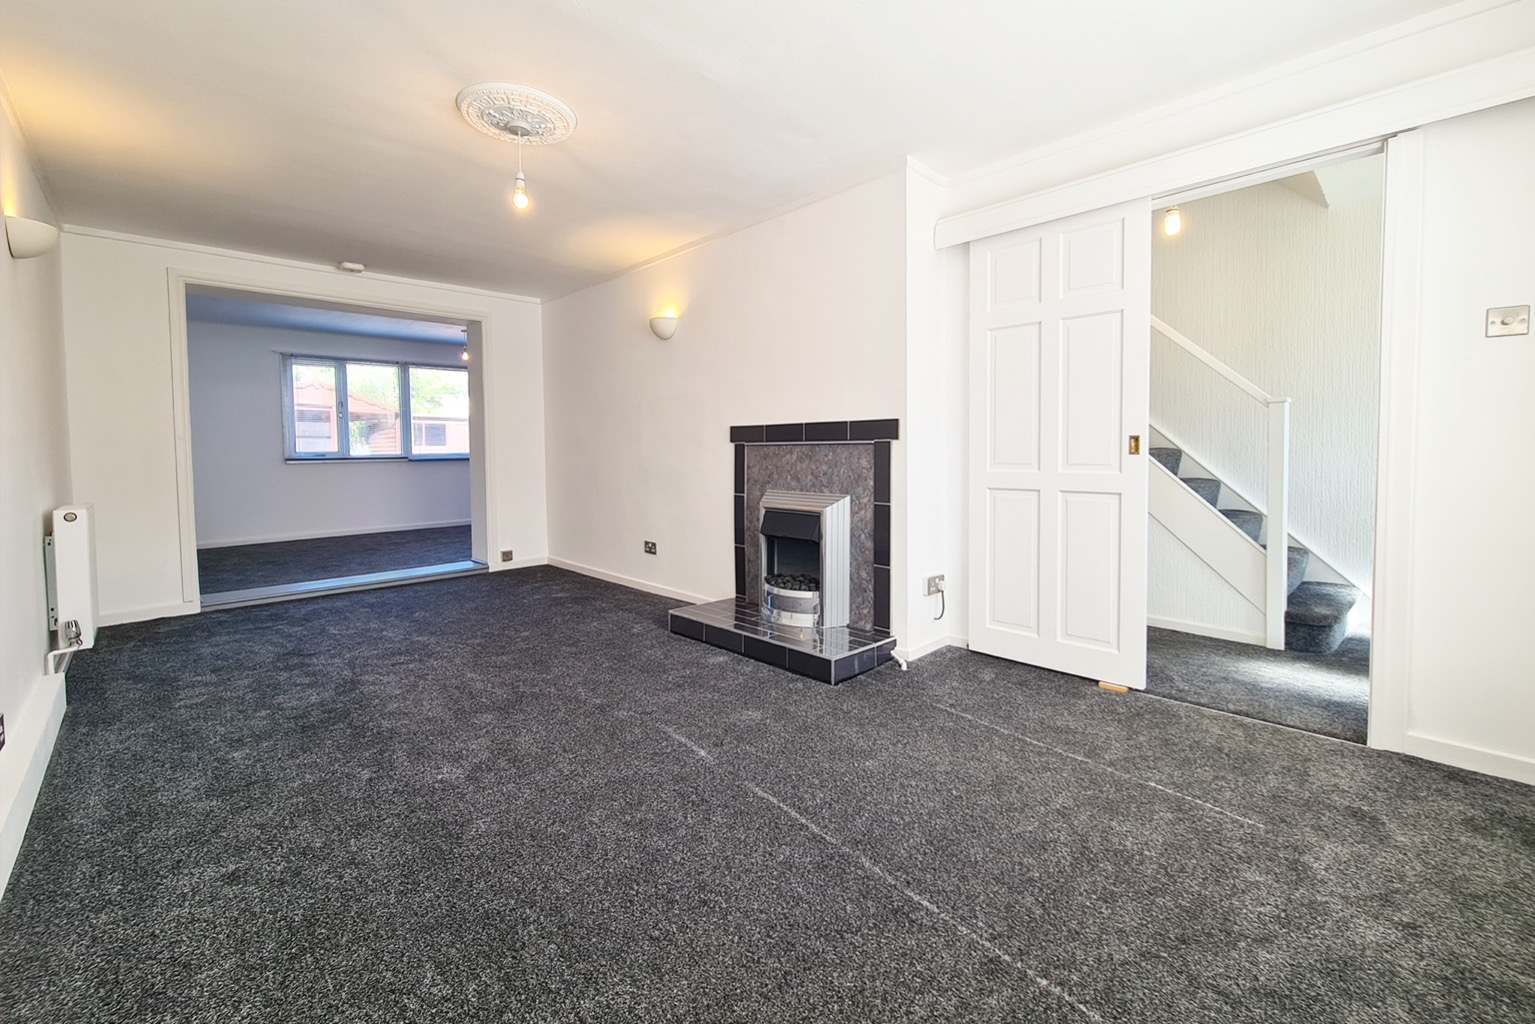 3 bed semi-detached house to rent - Property Image 1